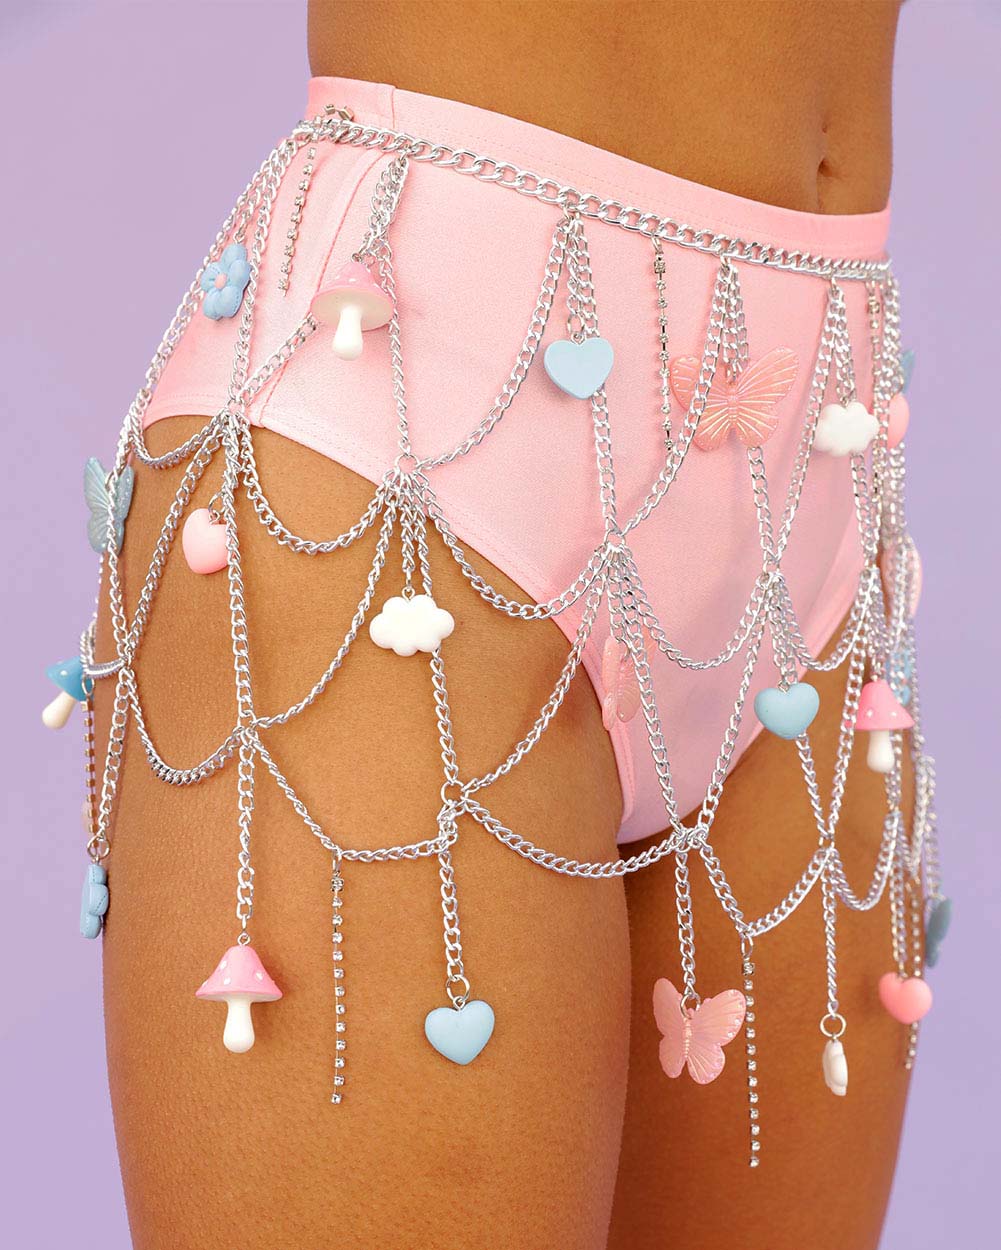 Petal Pixie Chain Skirt with Charms-Pink/Silver-Side